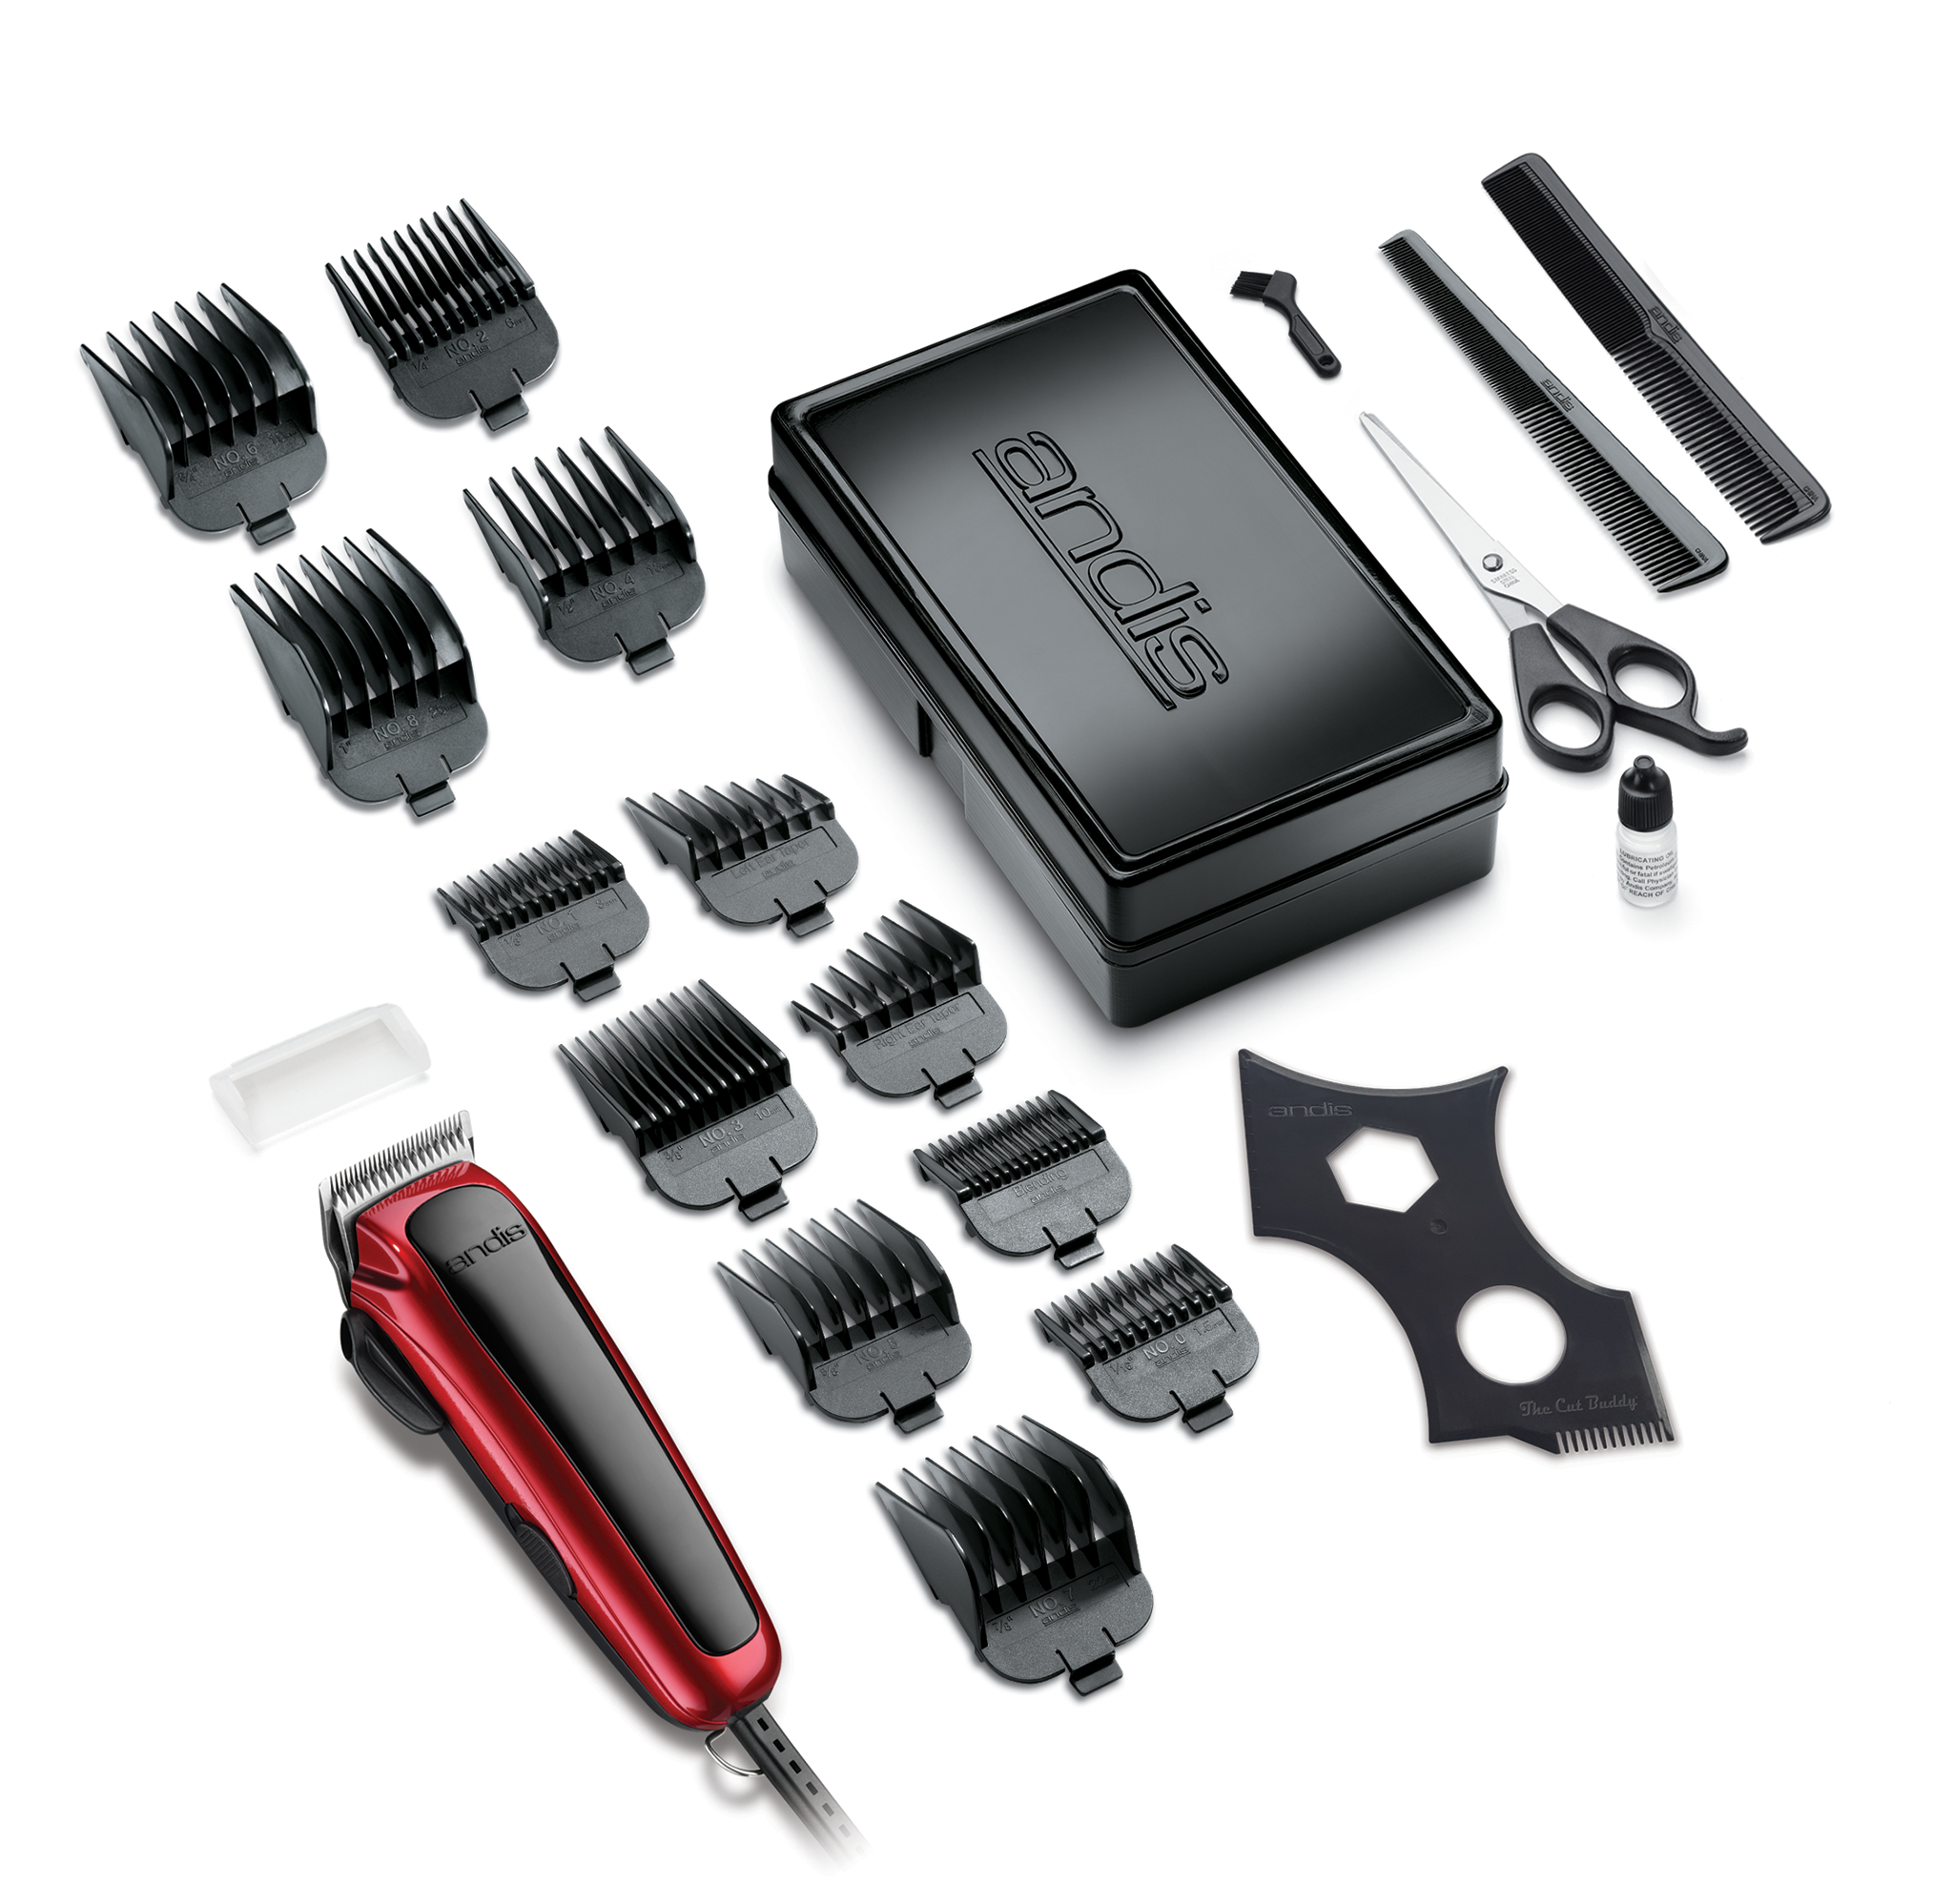 Andis EasyCut Home Haircutting Kit, Black, 20 Piece Kit with Bonus The Cut Buddy - image 1 of 3